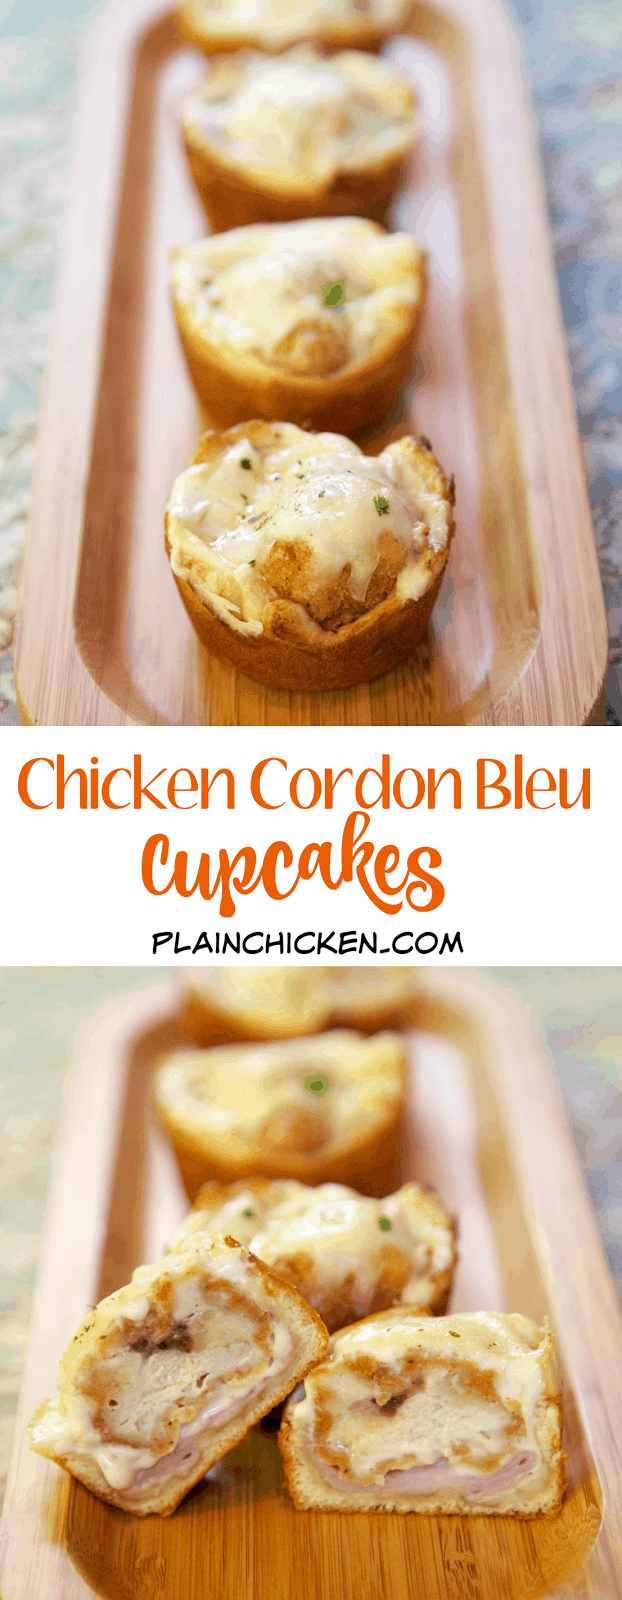 Chicken Cordon Bleu Cupcakes - frozen popcorn chicken, ham, alfredo sauce, swiss cheese baked in crescent cups! Only 5 ingredients and ready in under 20 minutes! These are great for a quick lunch, dinner or even a party! We love these!! Kids (and adults) gobble these up!